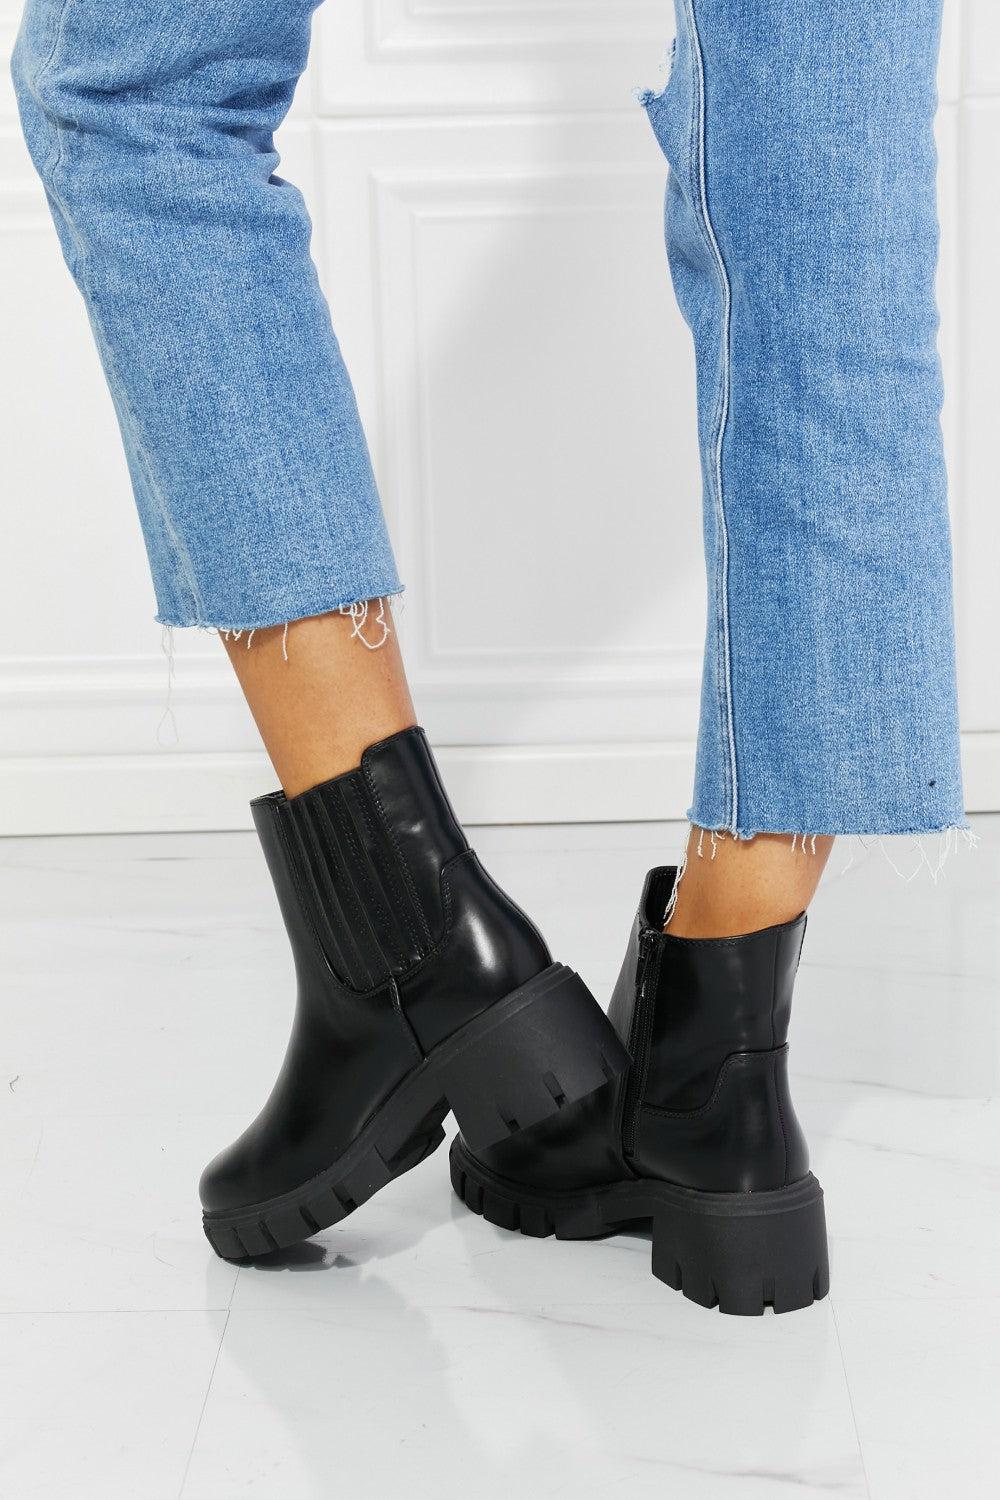 MMShoes What It Takes Lug Sole Chelsea Boots in Black BLUE ZONE PLANET